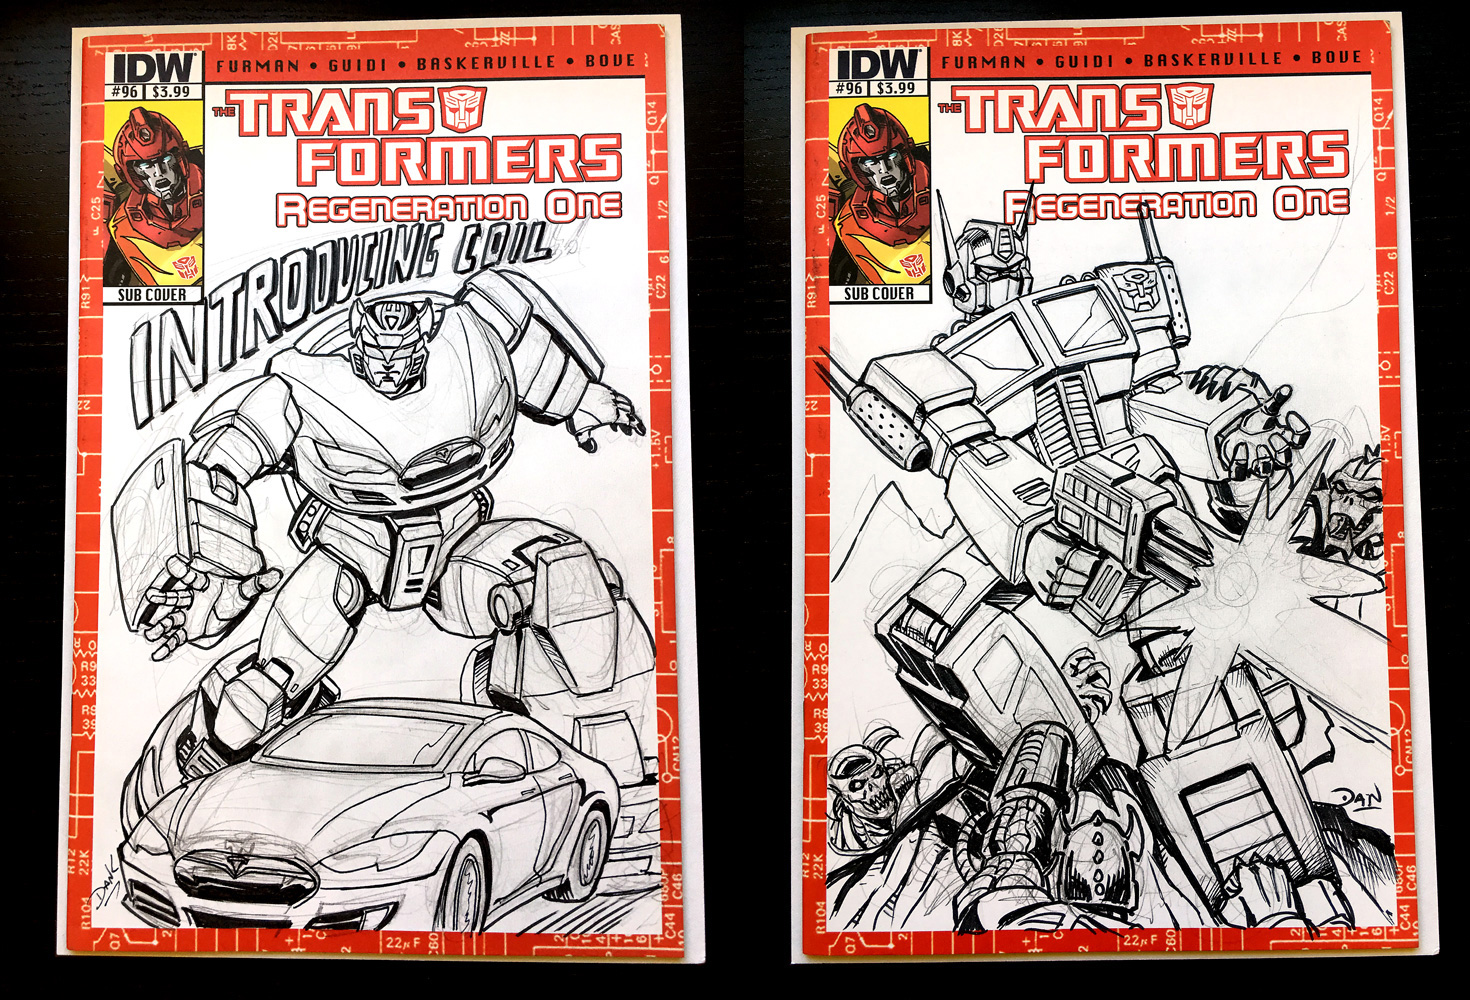 A Tale Of Two Sketch Covers